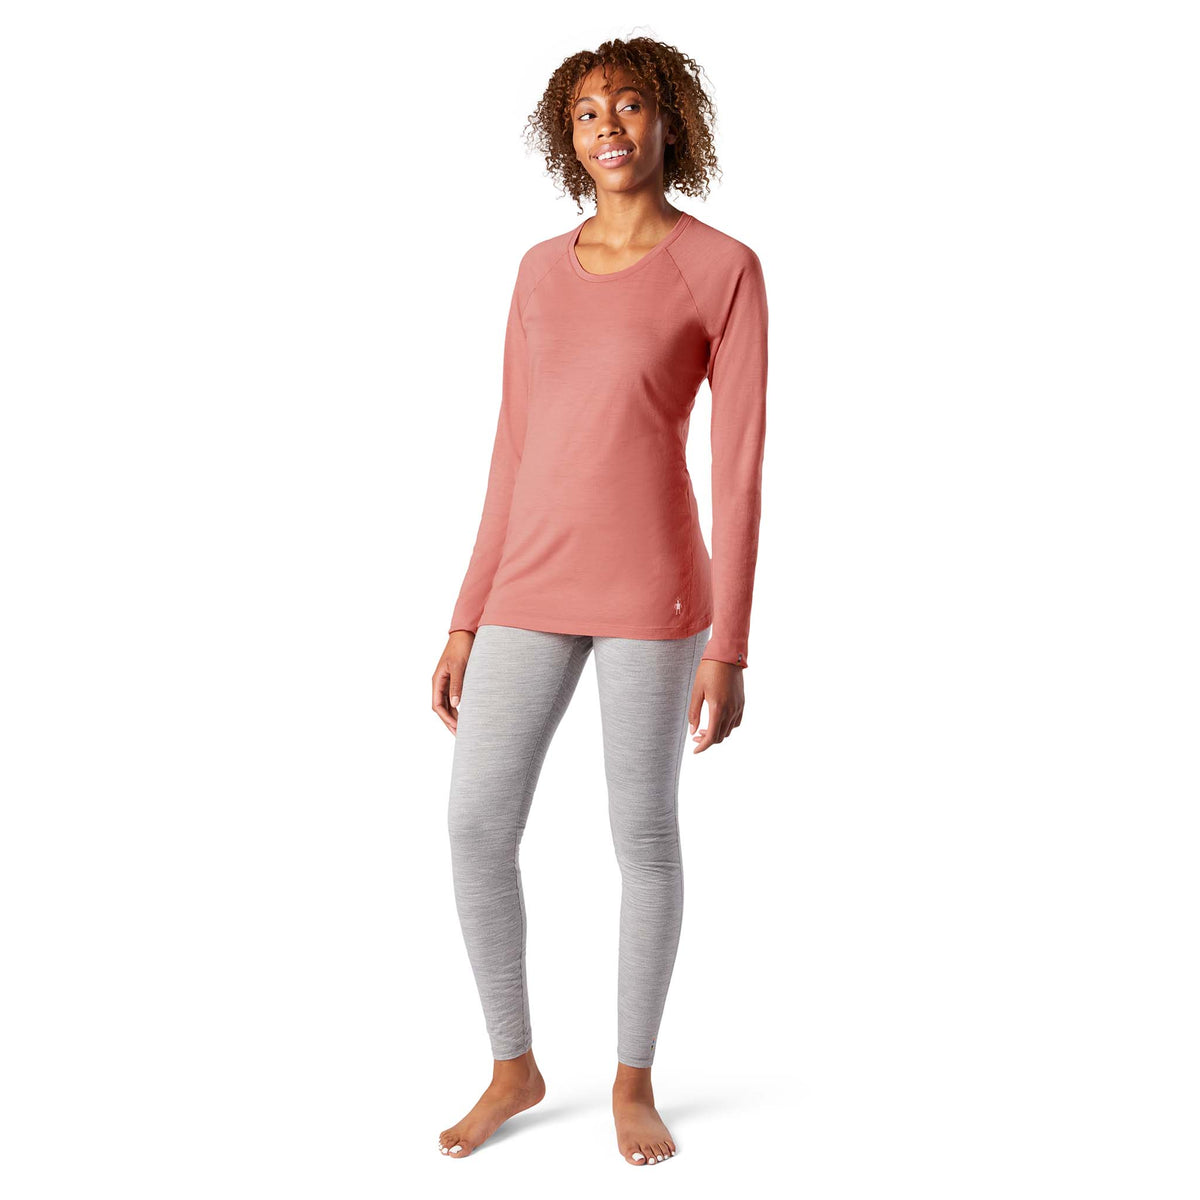 Smartwool Merino 150 Baselayer chandail à manches longues rose femme face